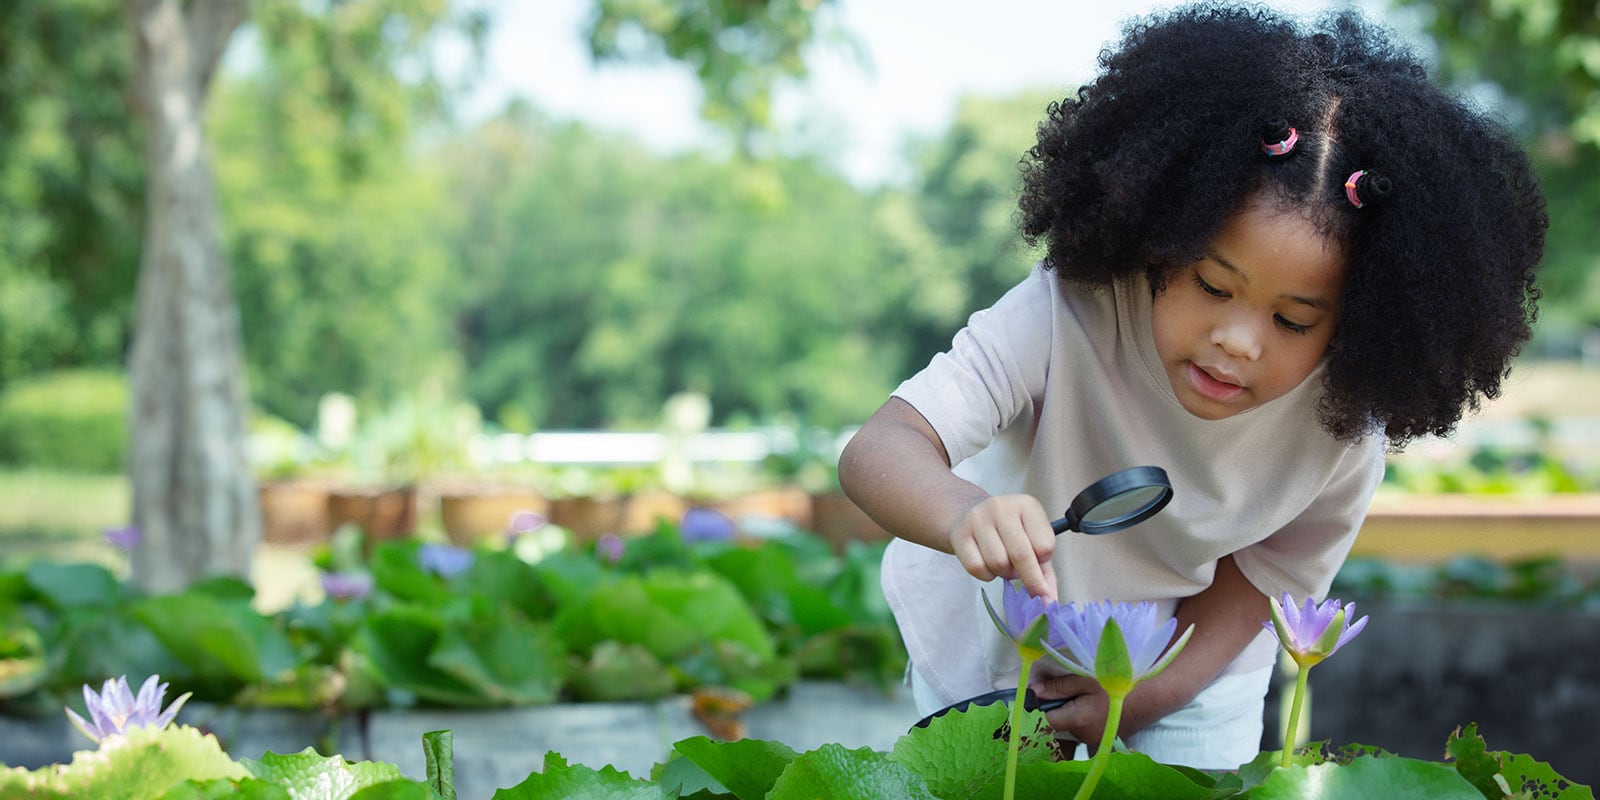 Youg girl using a magnifying glass to look at plants and bugs. 